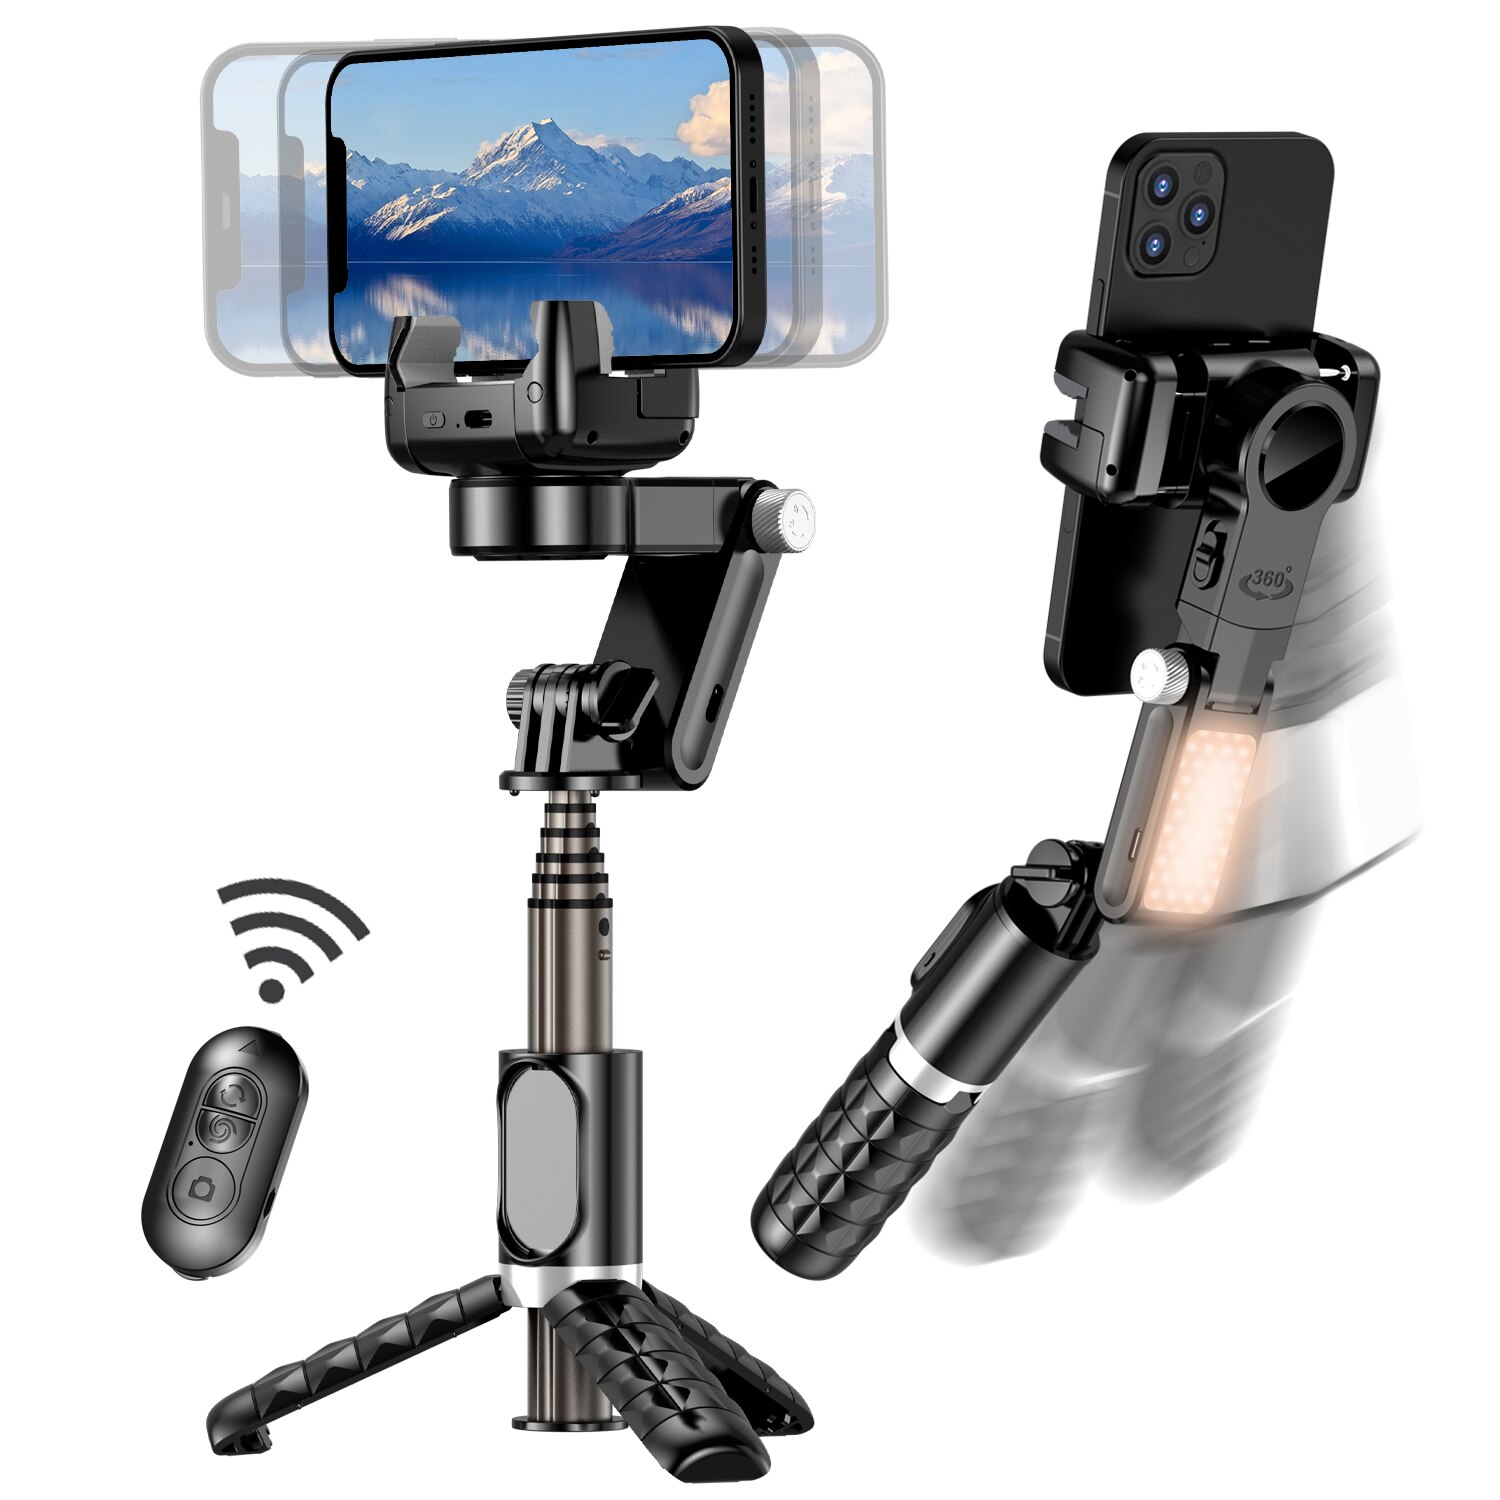 Gimbal Stabilizer for Smartphone, 2 Axis Selfie Stick Tripod with Face Tracking, 360° Rotation, 4 in 1 Portable